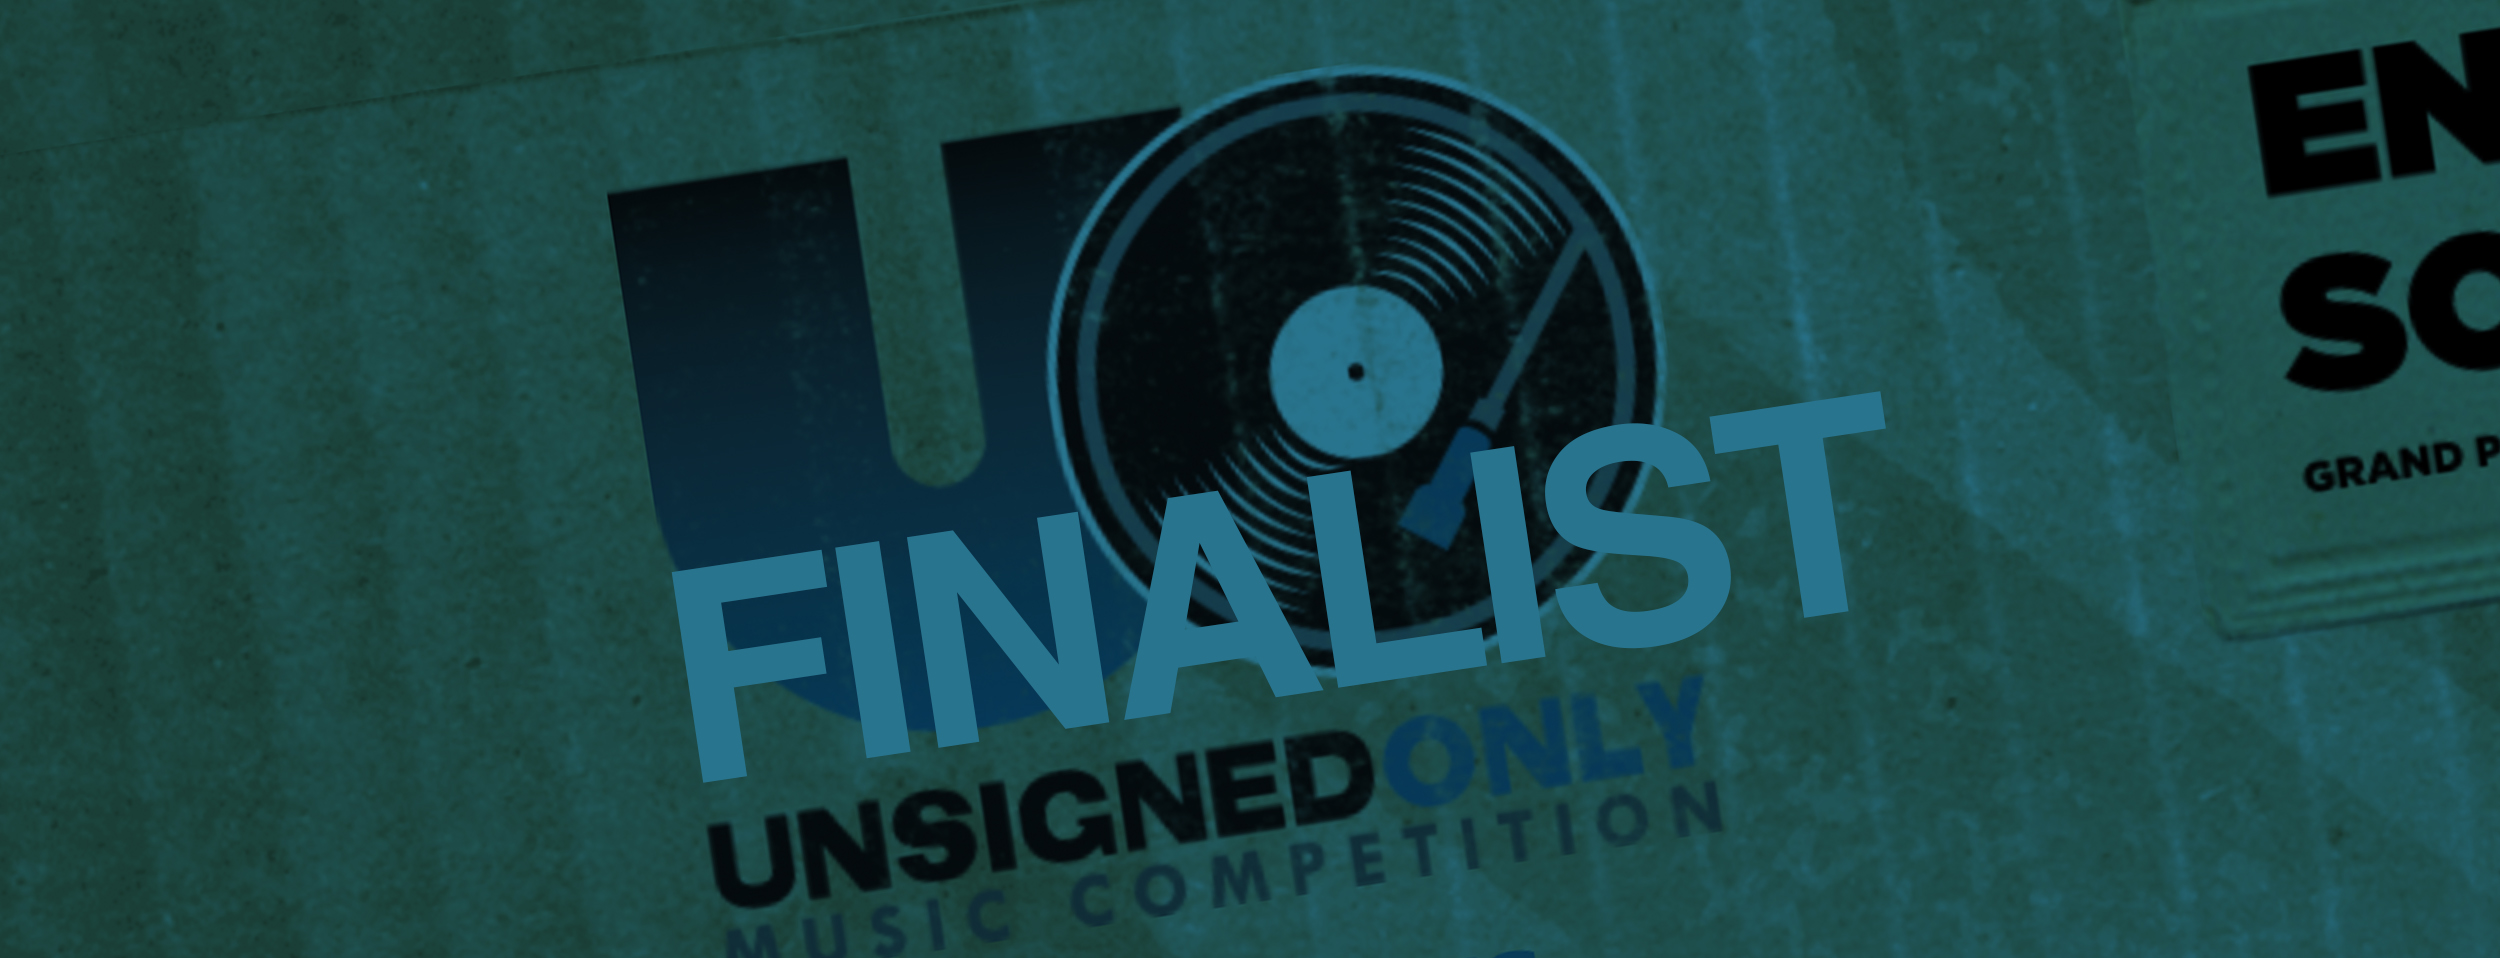 Janky Song a Finalist in Songwriter Comp